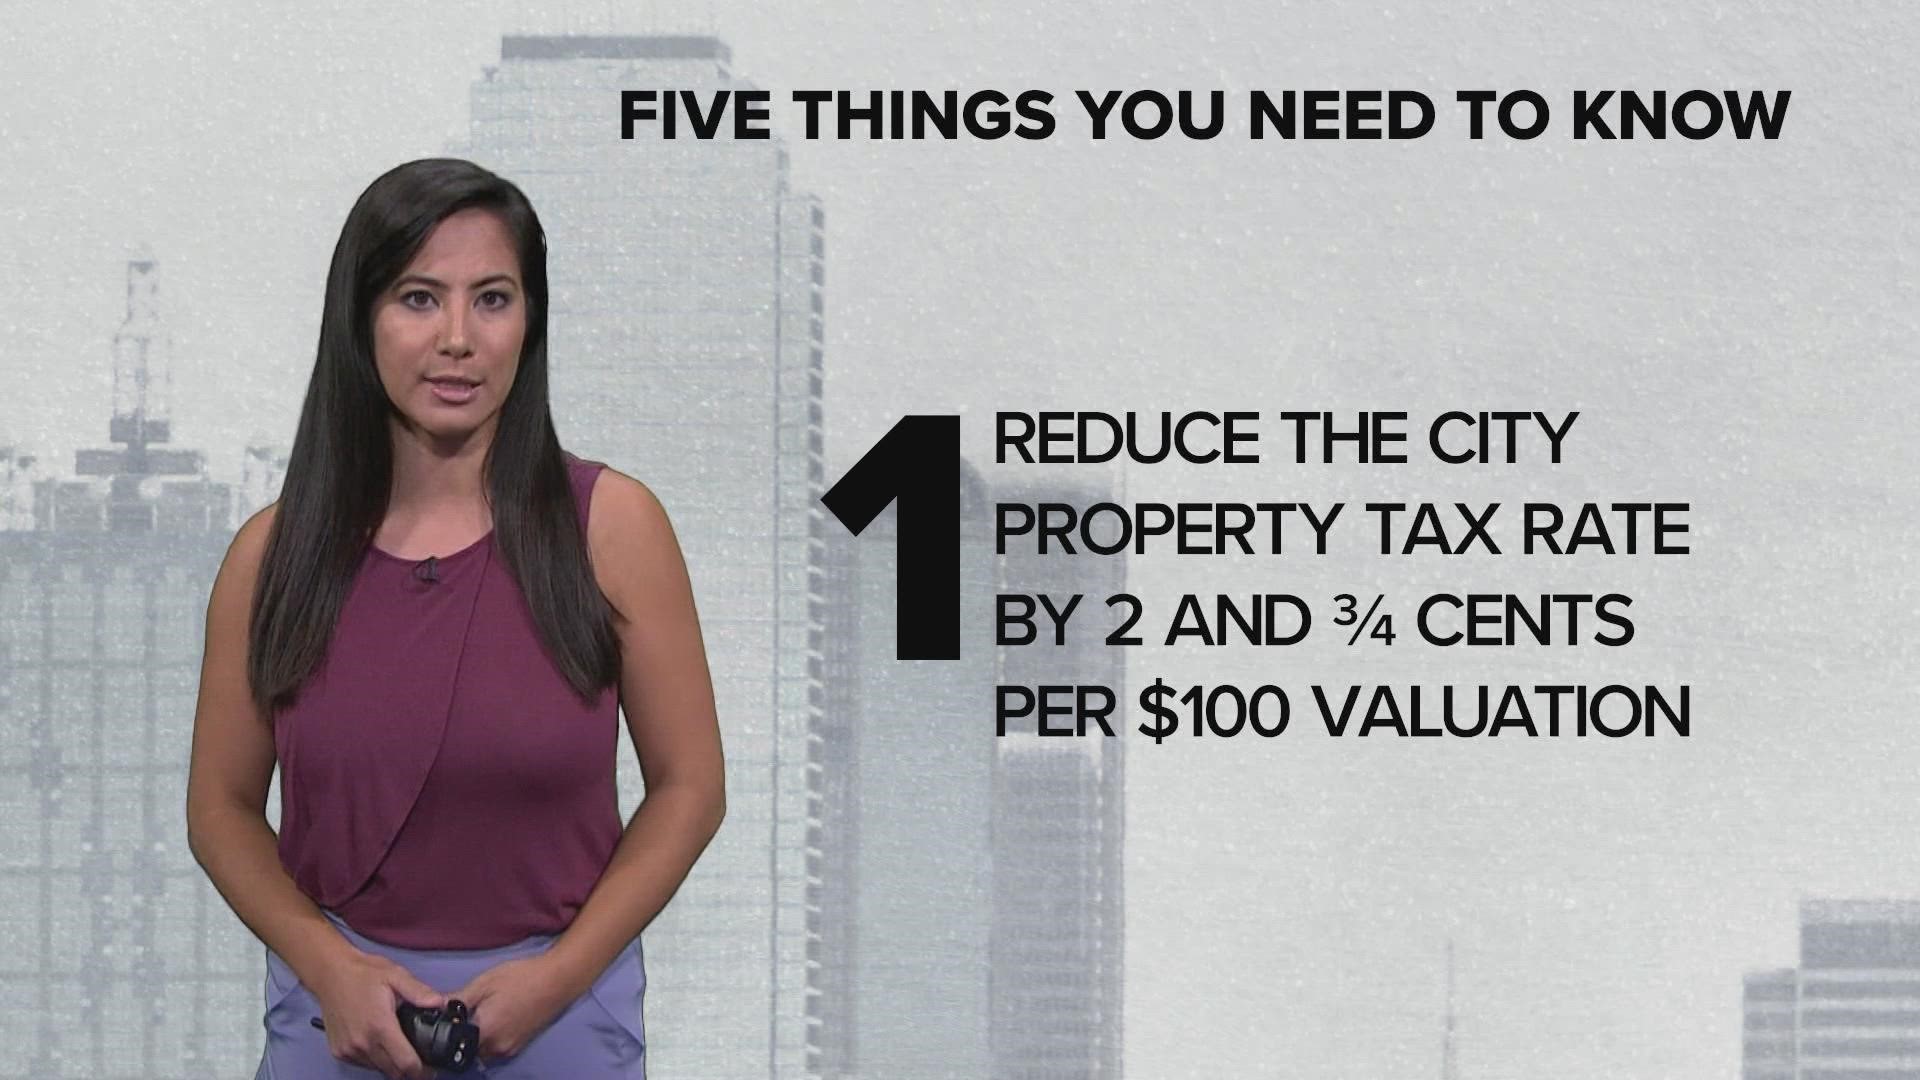 In an attempt to drum up support for their proposal, the mayor and city manager both point to a proposed reduction in the city's property tax rate.